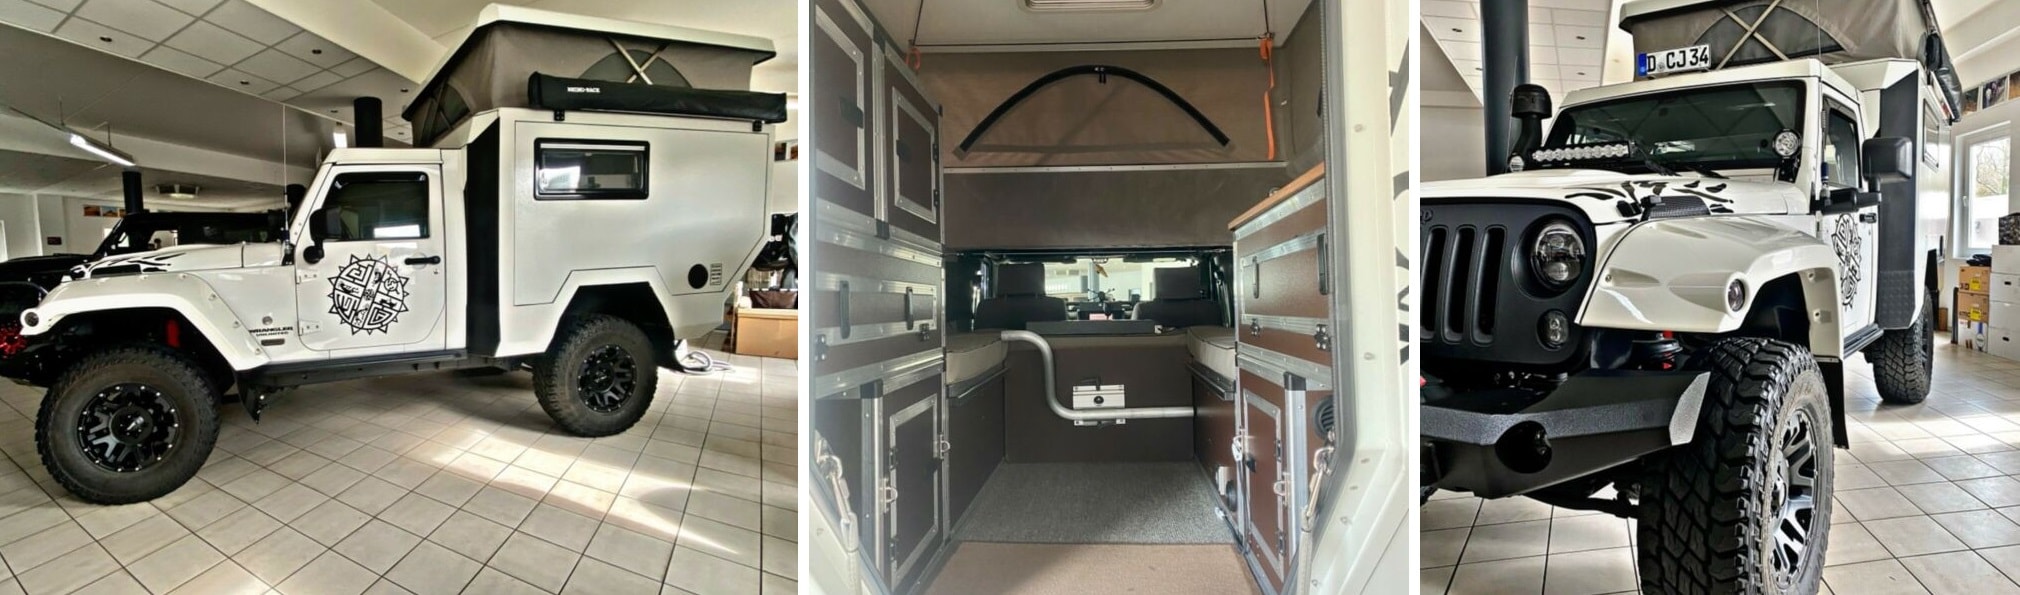 Spend the Summer and Every Other Season With This Custom Jeep Wrangler  Camper - autoevolution